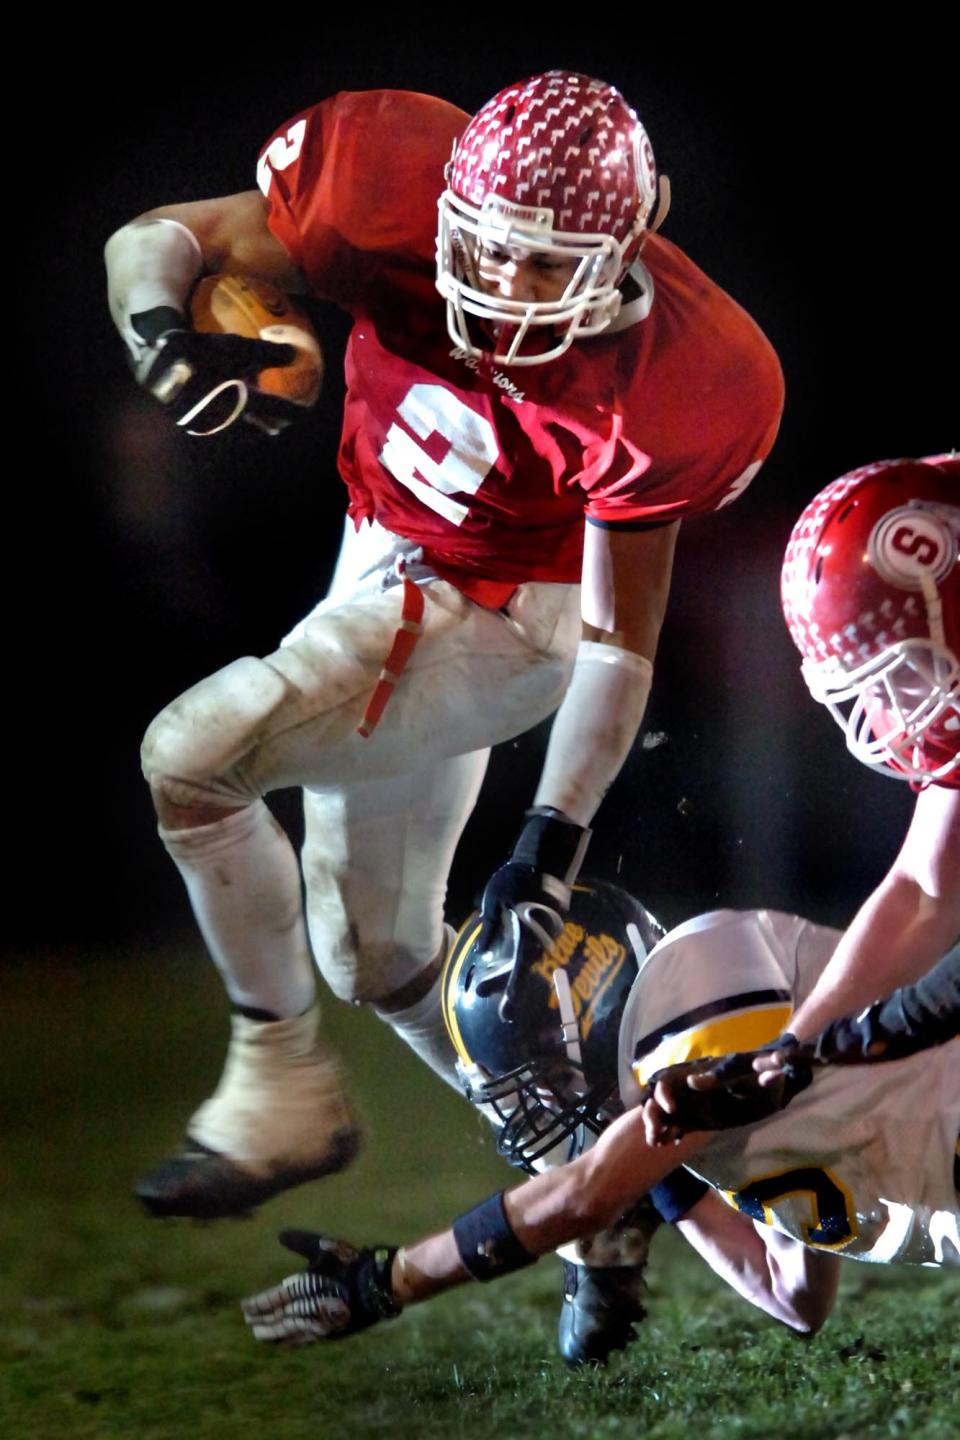 Chaz Powell elevated himself from stardom at Susquehannock into a national football recruit, eventually playing for Penn State. He said he's dedicated now to helping high school athletes realize their own potential -- to take advantage of training opportunities he didn't have -- while playing for York High.